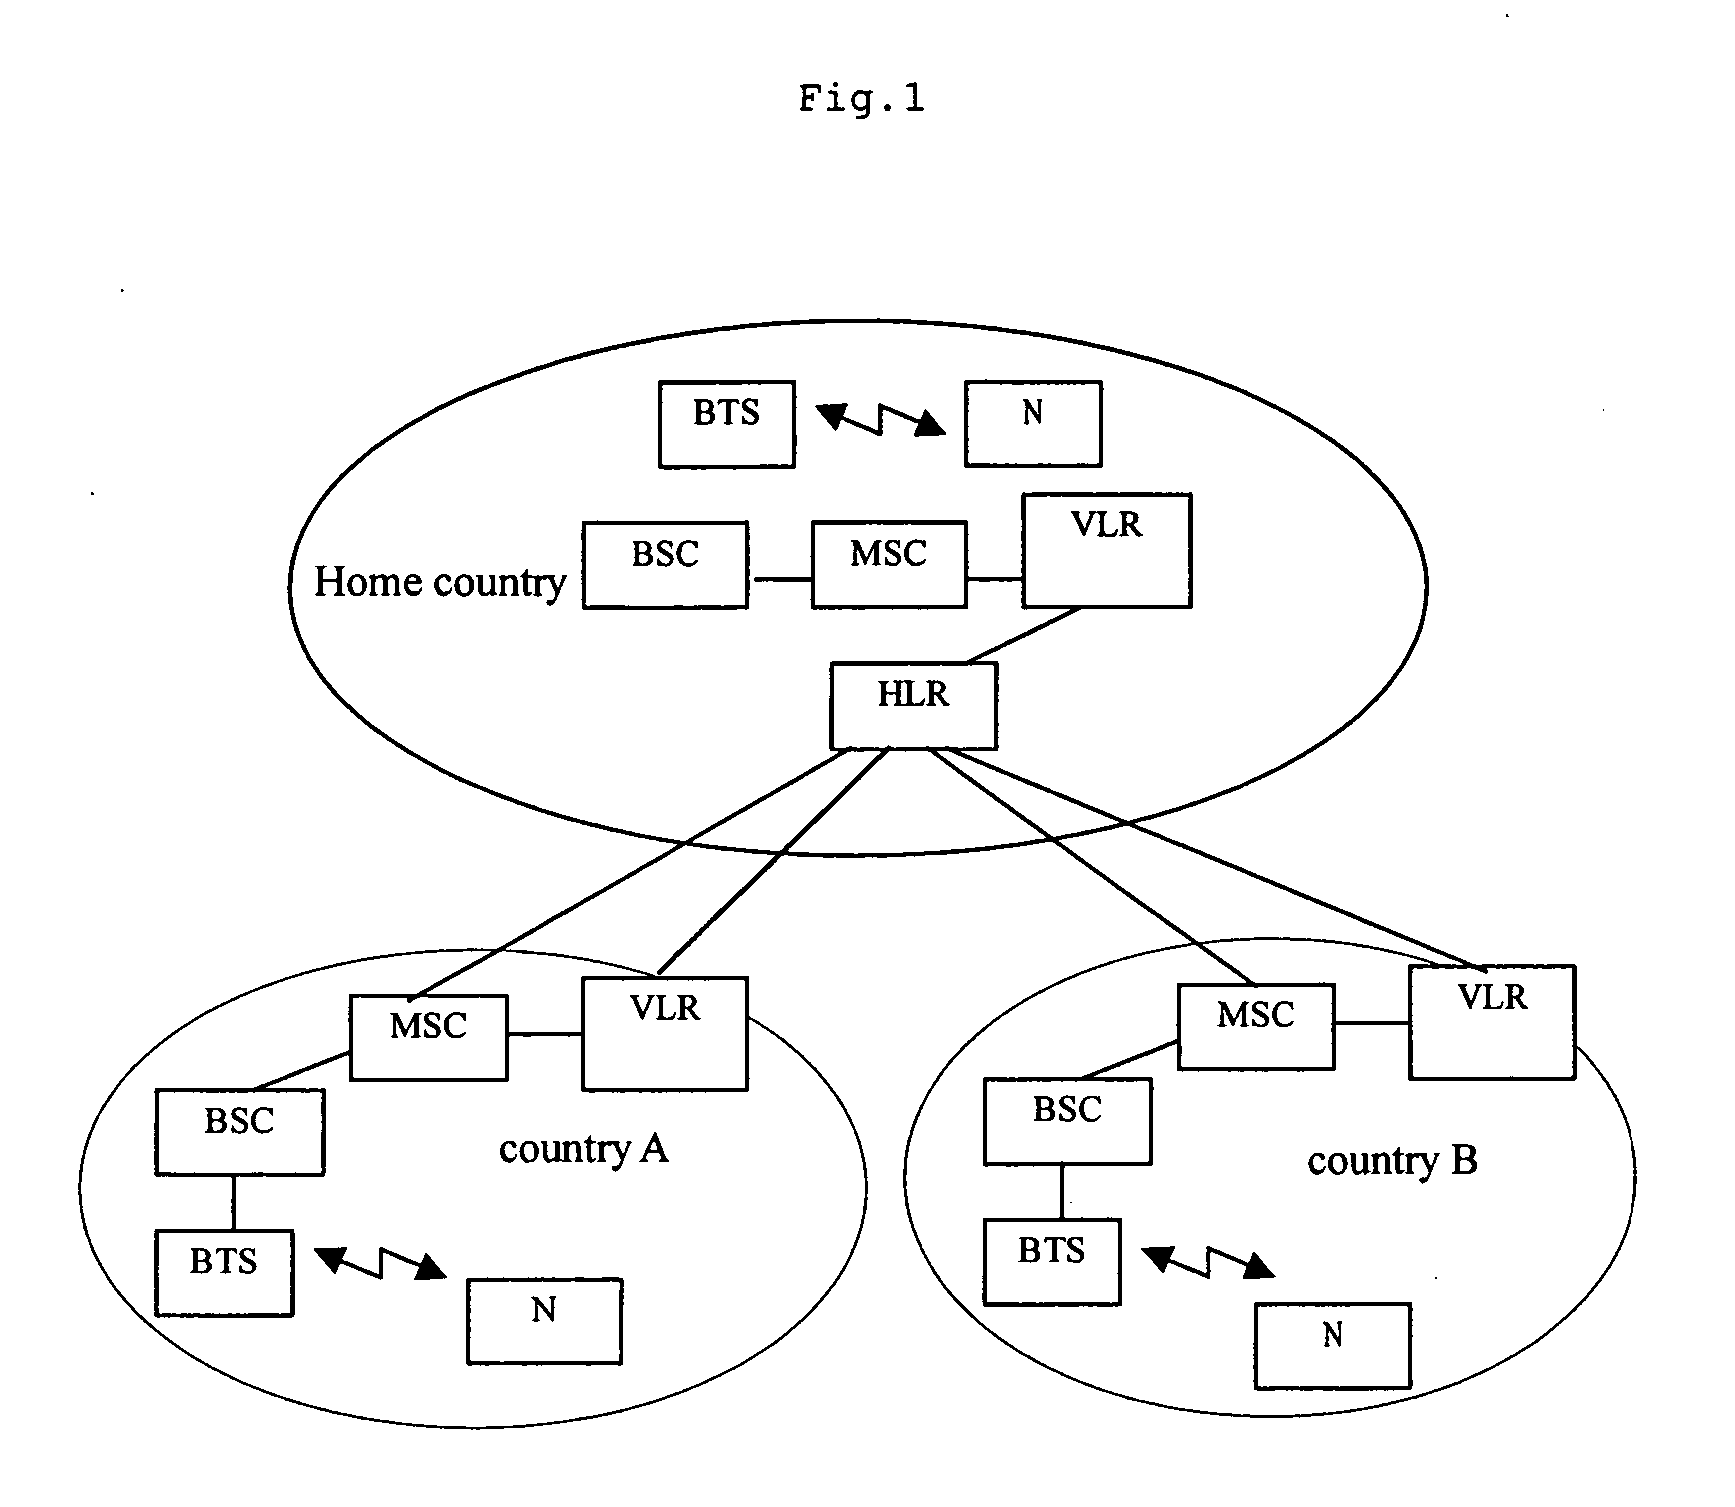 Network and method of realizing local roaming for subscribers